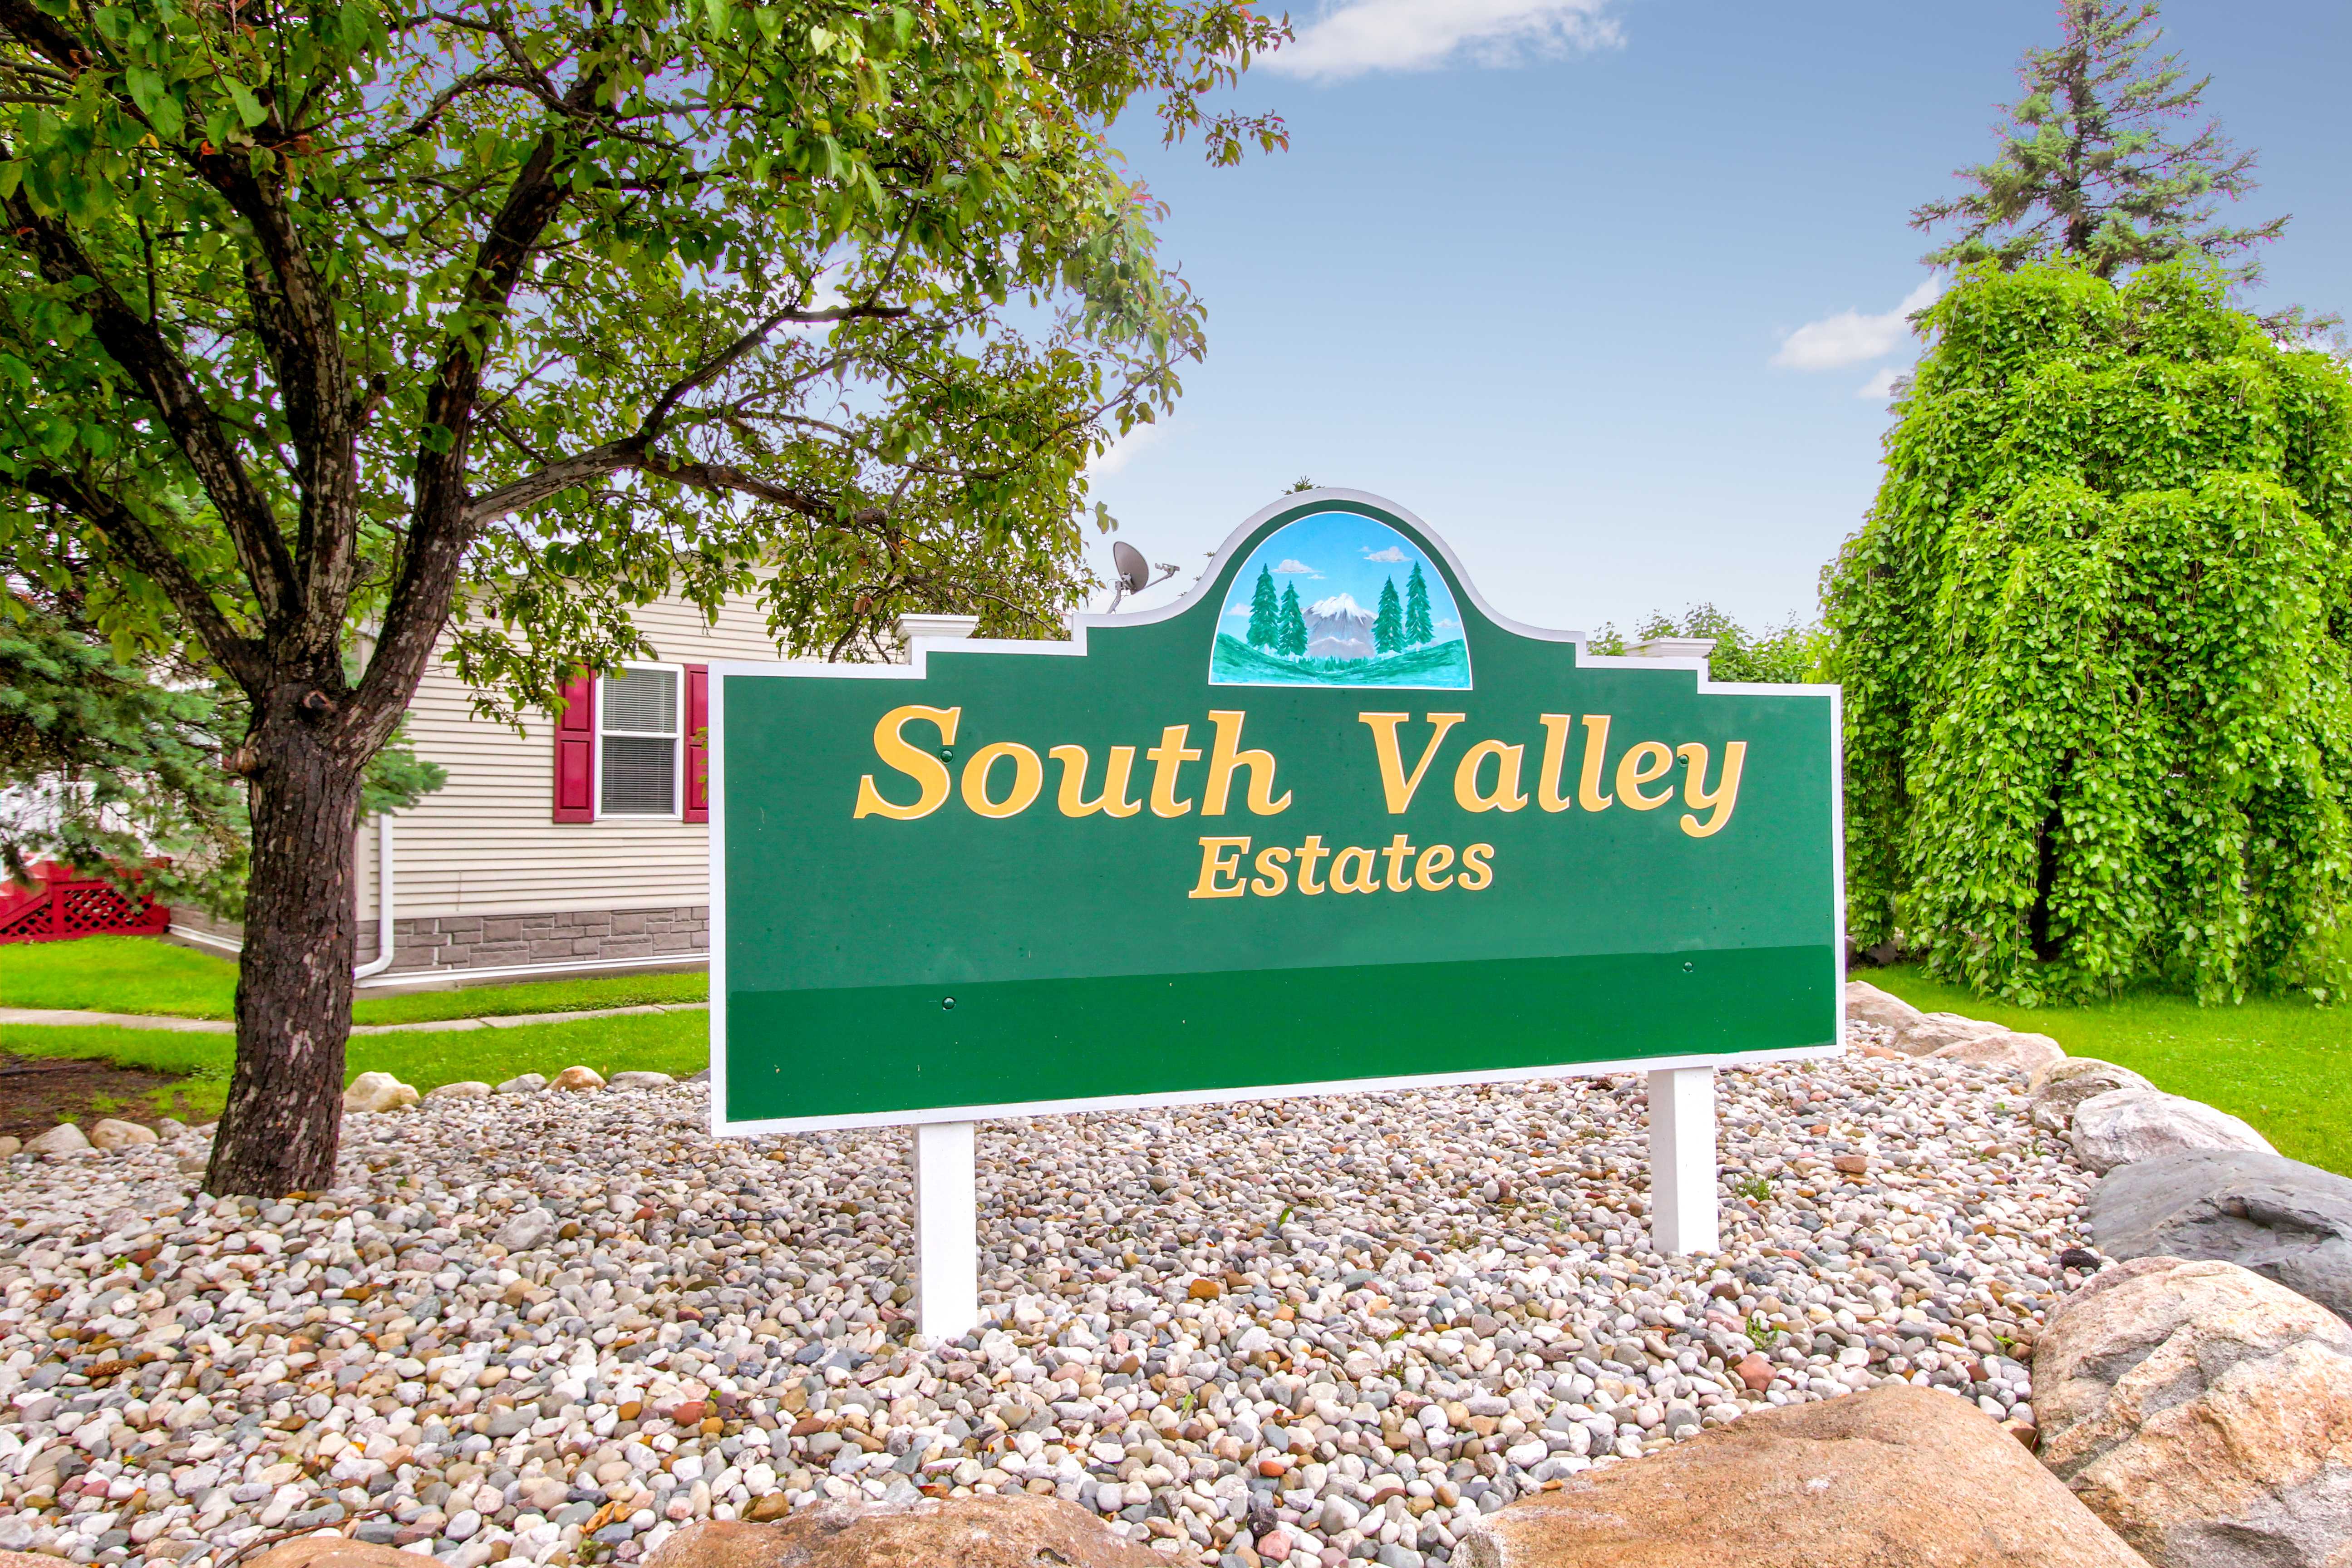 South Valley Estates features beautiful homes and tight-knit community.